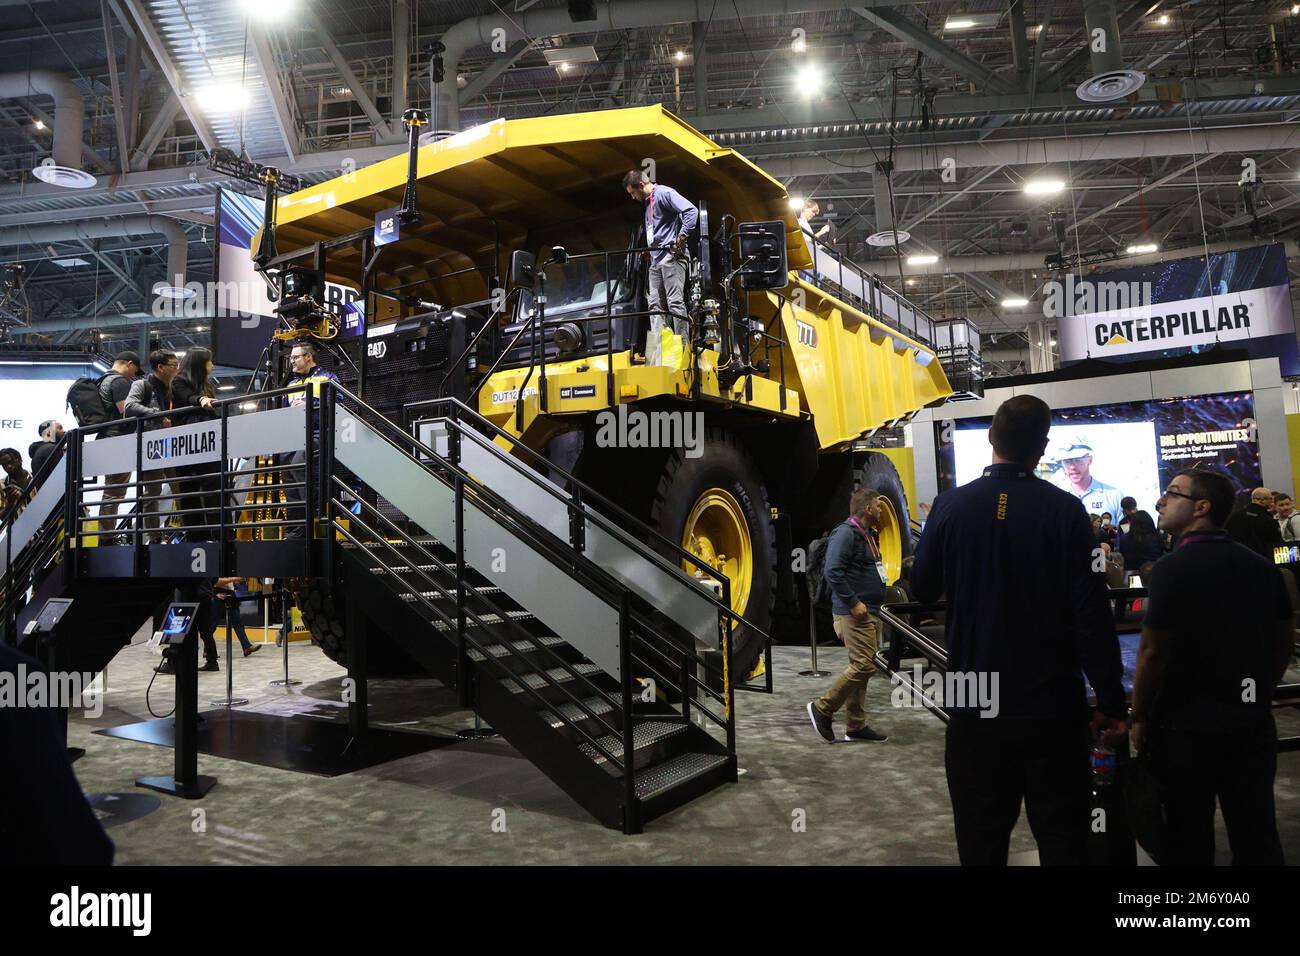 Las Vegas, United States. 05th Jan, 2023. A view of the gigantic Caterpillar 777 haul truck on display during the 2023 International CES, at the Las Vegas Convention Center in Las Vegas, Nevada on Thursday, January 5, 2023. The Cat777 is a 100-ton haul truck, typically used in open pit mining. Photo by James Atoa/UPI Credit: UPI/Alamy Live News Stock Photo